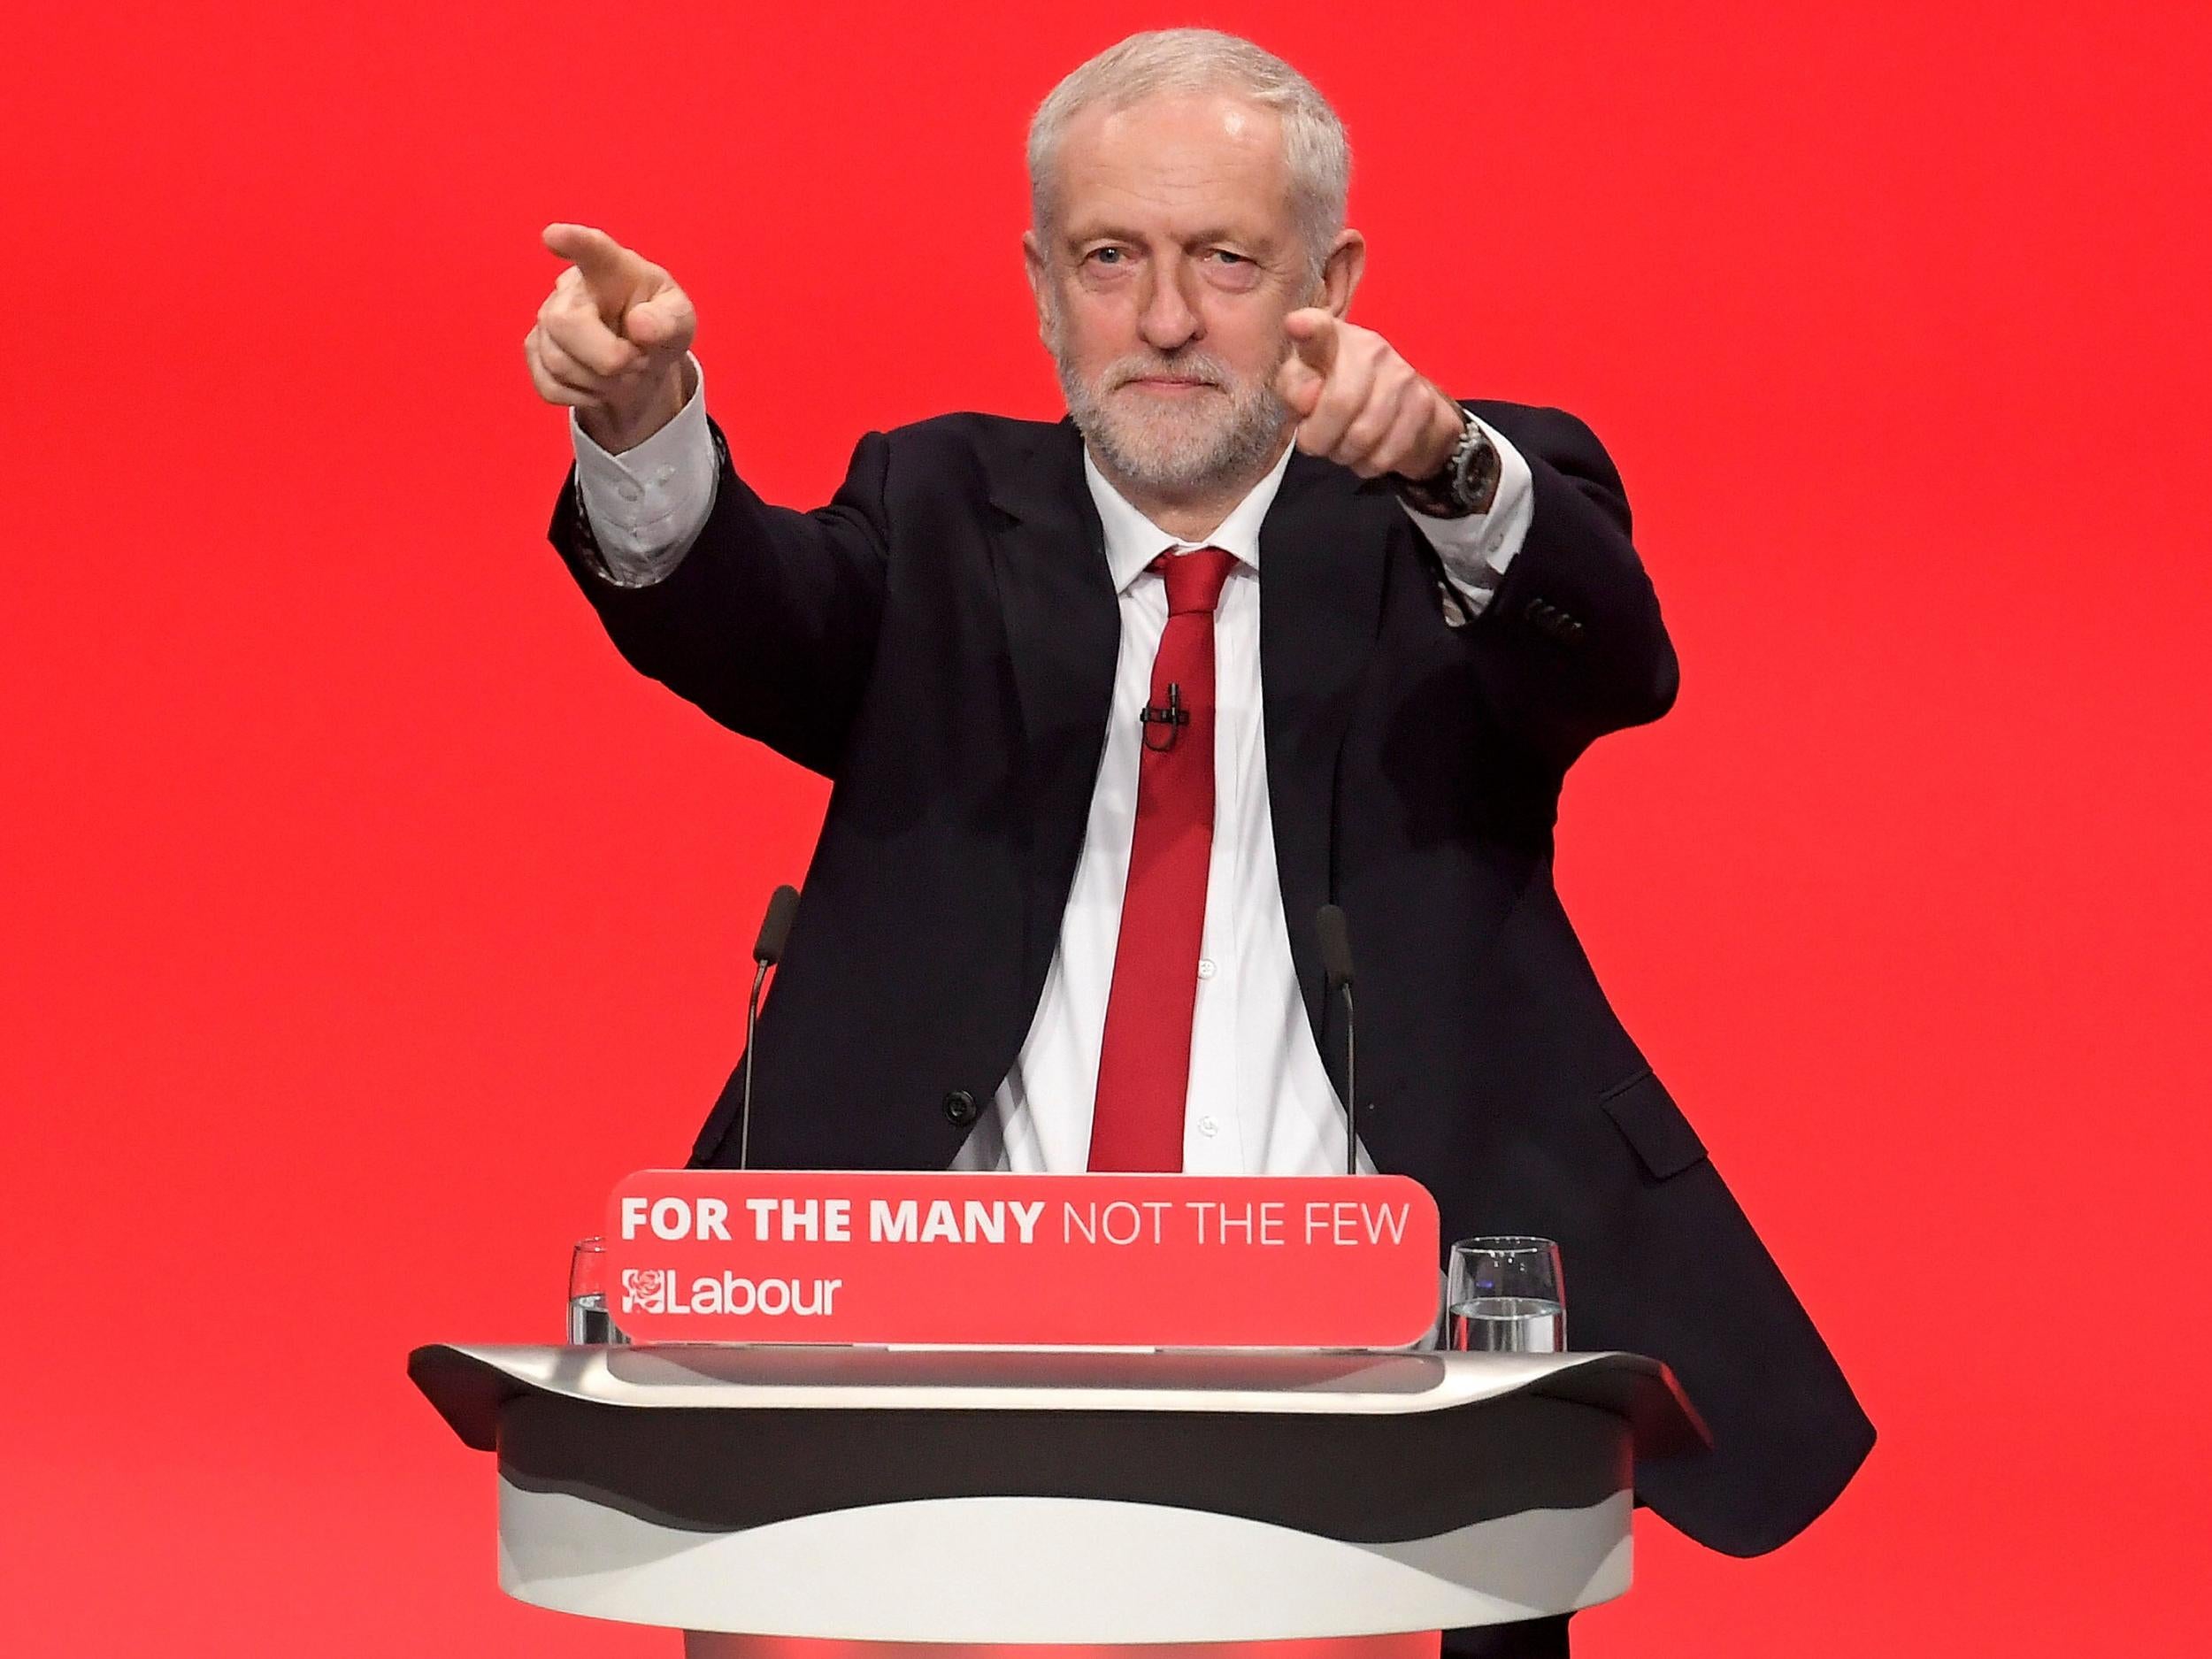 Mr Corbyn said Labour was a 'government in waiting' and was ready to 'take up the responsibility for Brexit negotiations' following June's shock election result